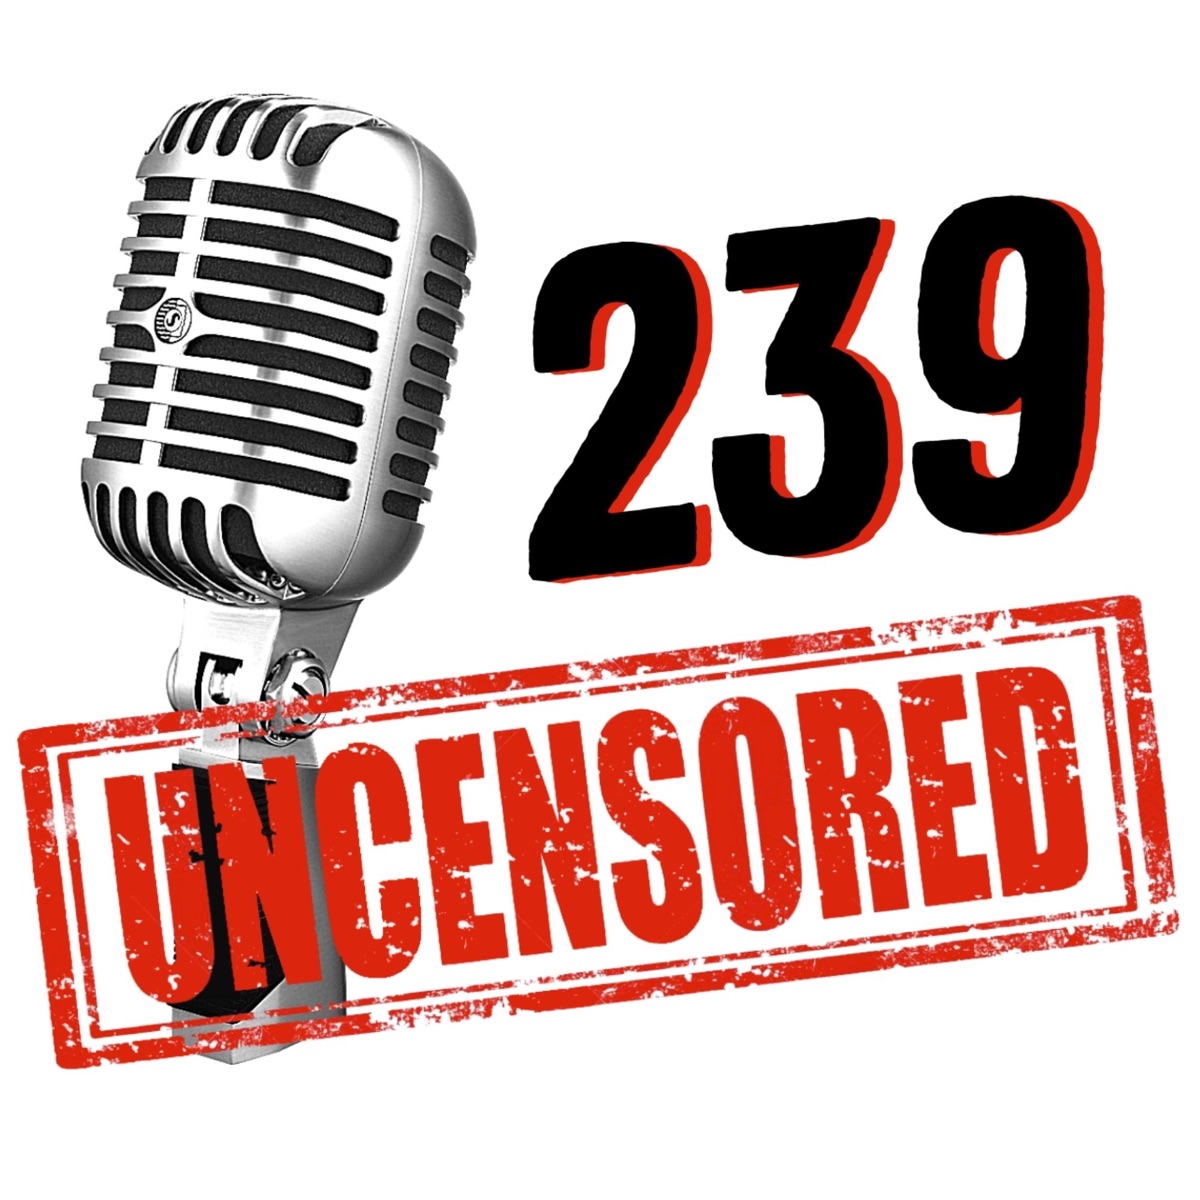 088 Remember Tim Constantine former Collier County Commissioner? Where is he now? HIs passion for Politics, Broadcasting and Music How did we both end up in Naples, Fl? – 239 UNCENSORED – Podcast